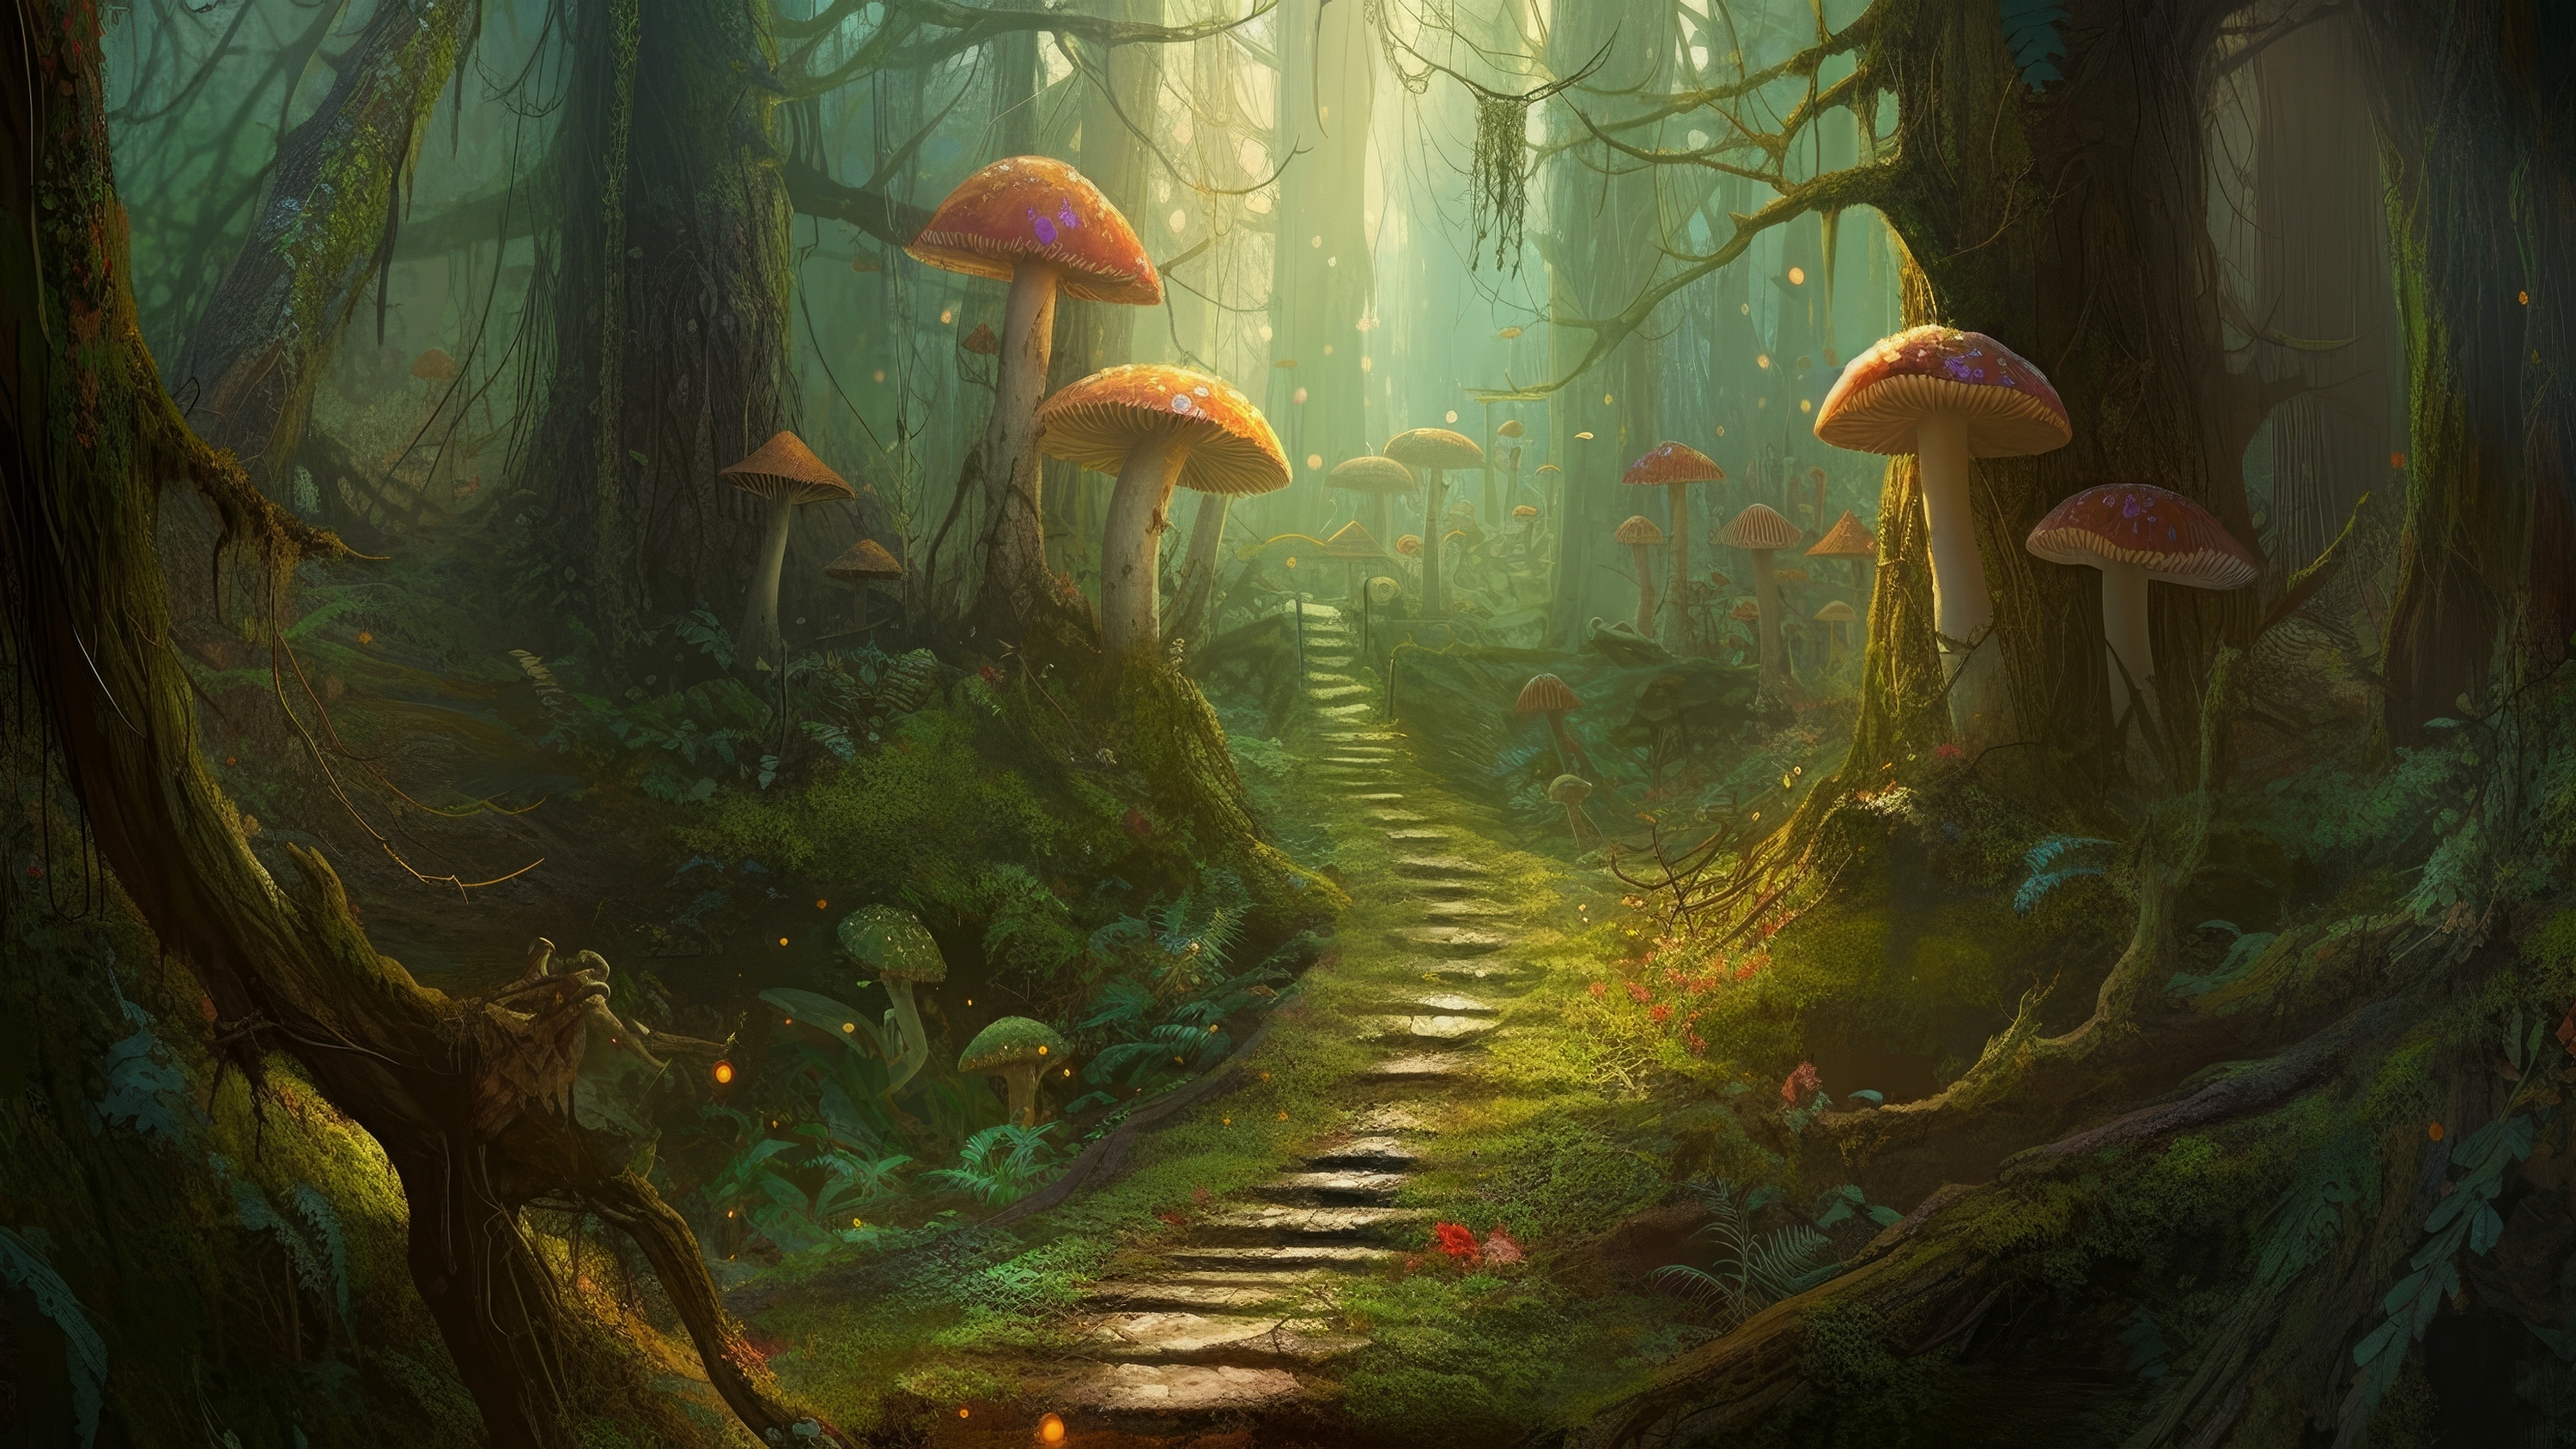 A fantasy forest trail with big mushrooms